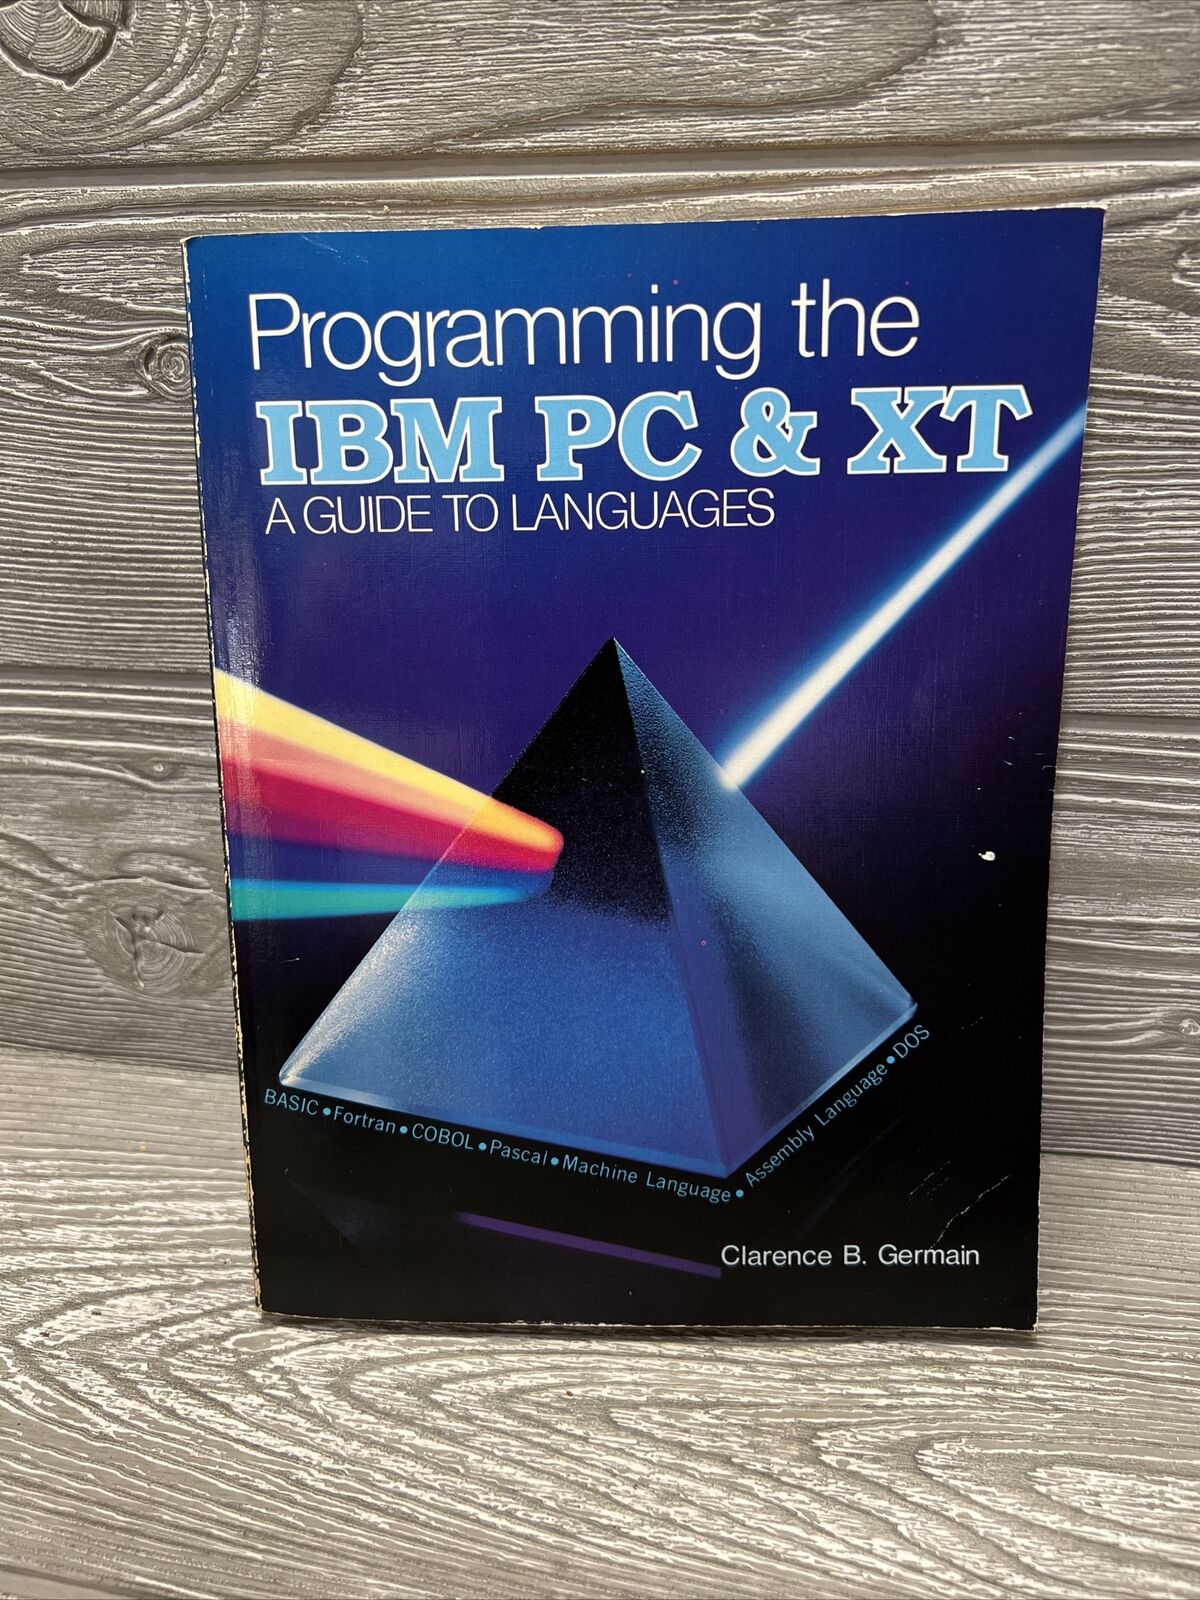 Vintage Programming the IBM PC & XT A Guide to Languages Book 1984 Softcover